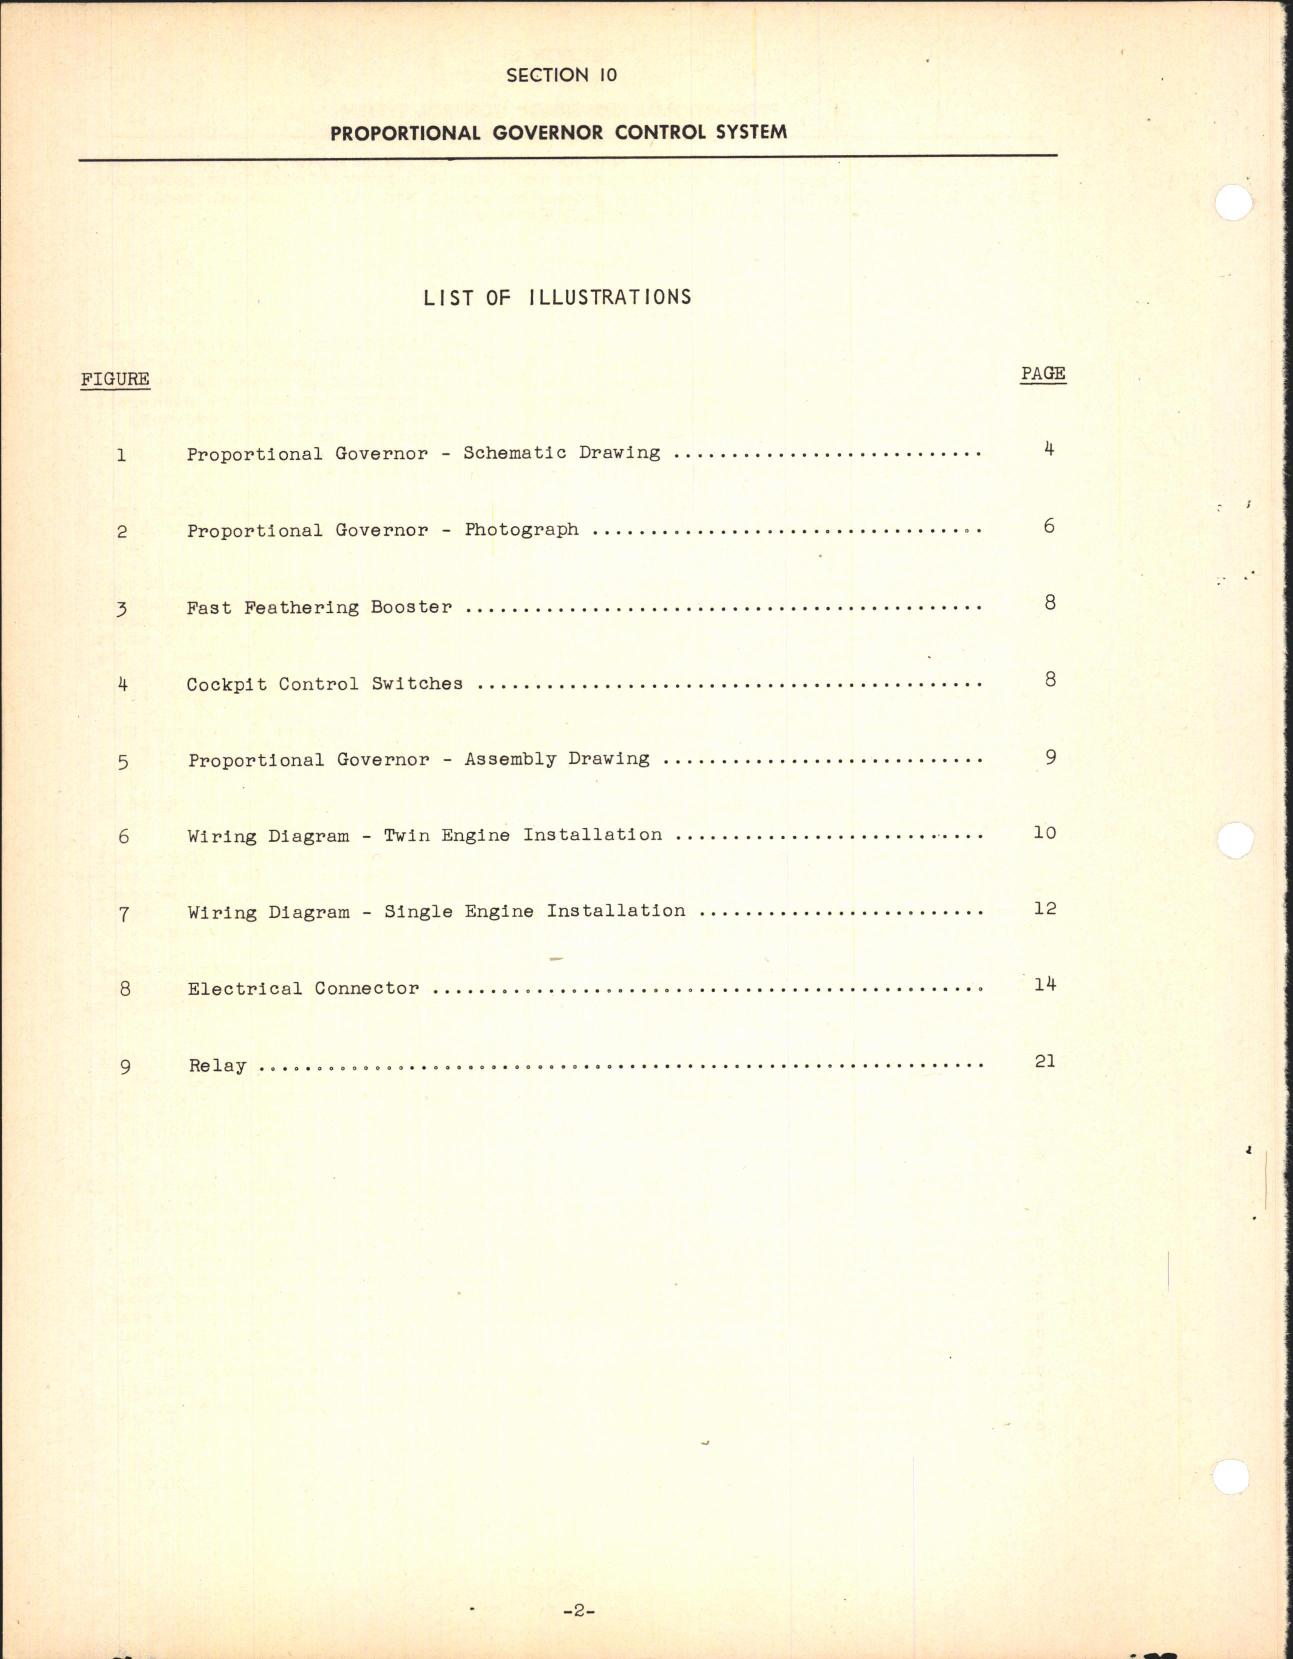 Sample page 4 from AirCorps Library document: Section 10 - Proportional Governor Control System